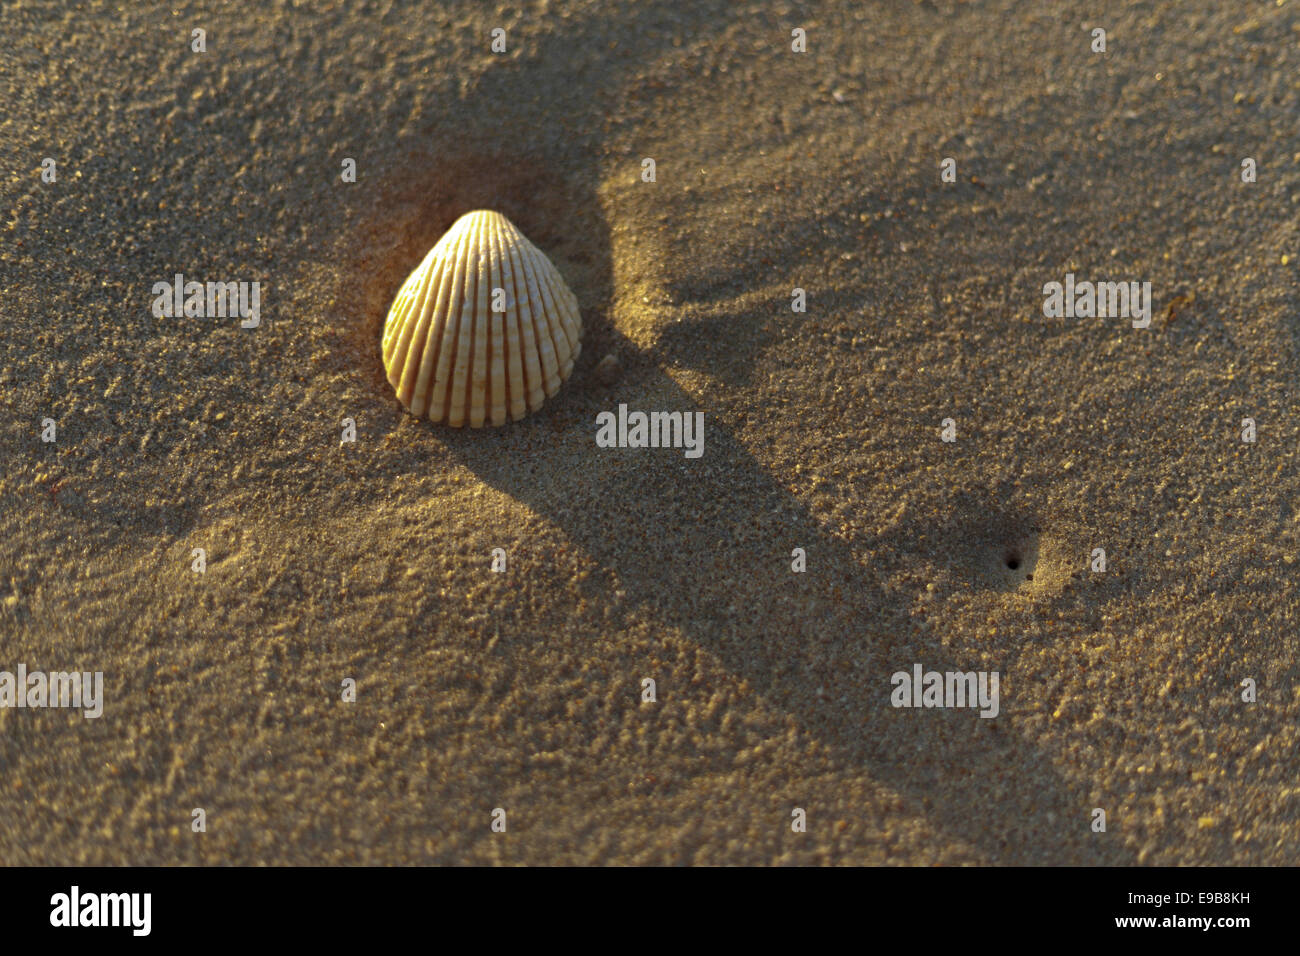 A shell in Spain Andalusia Costa de la luz during the sunrise on the beach sand. Stock Photo